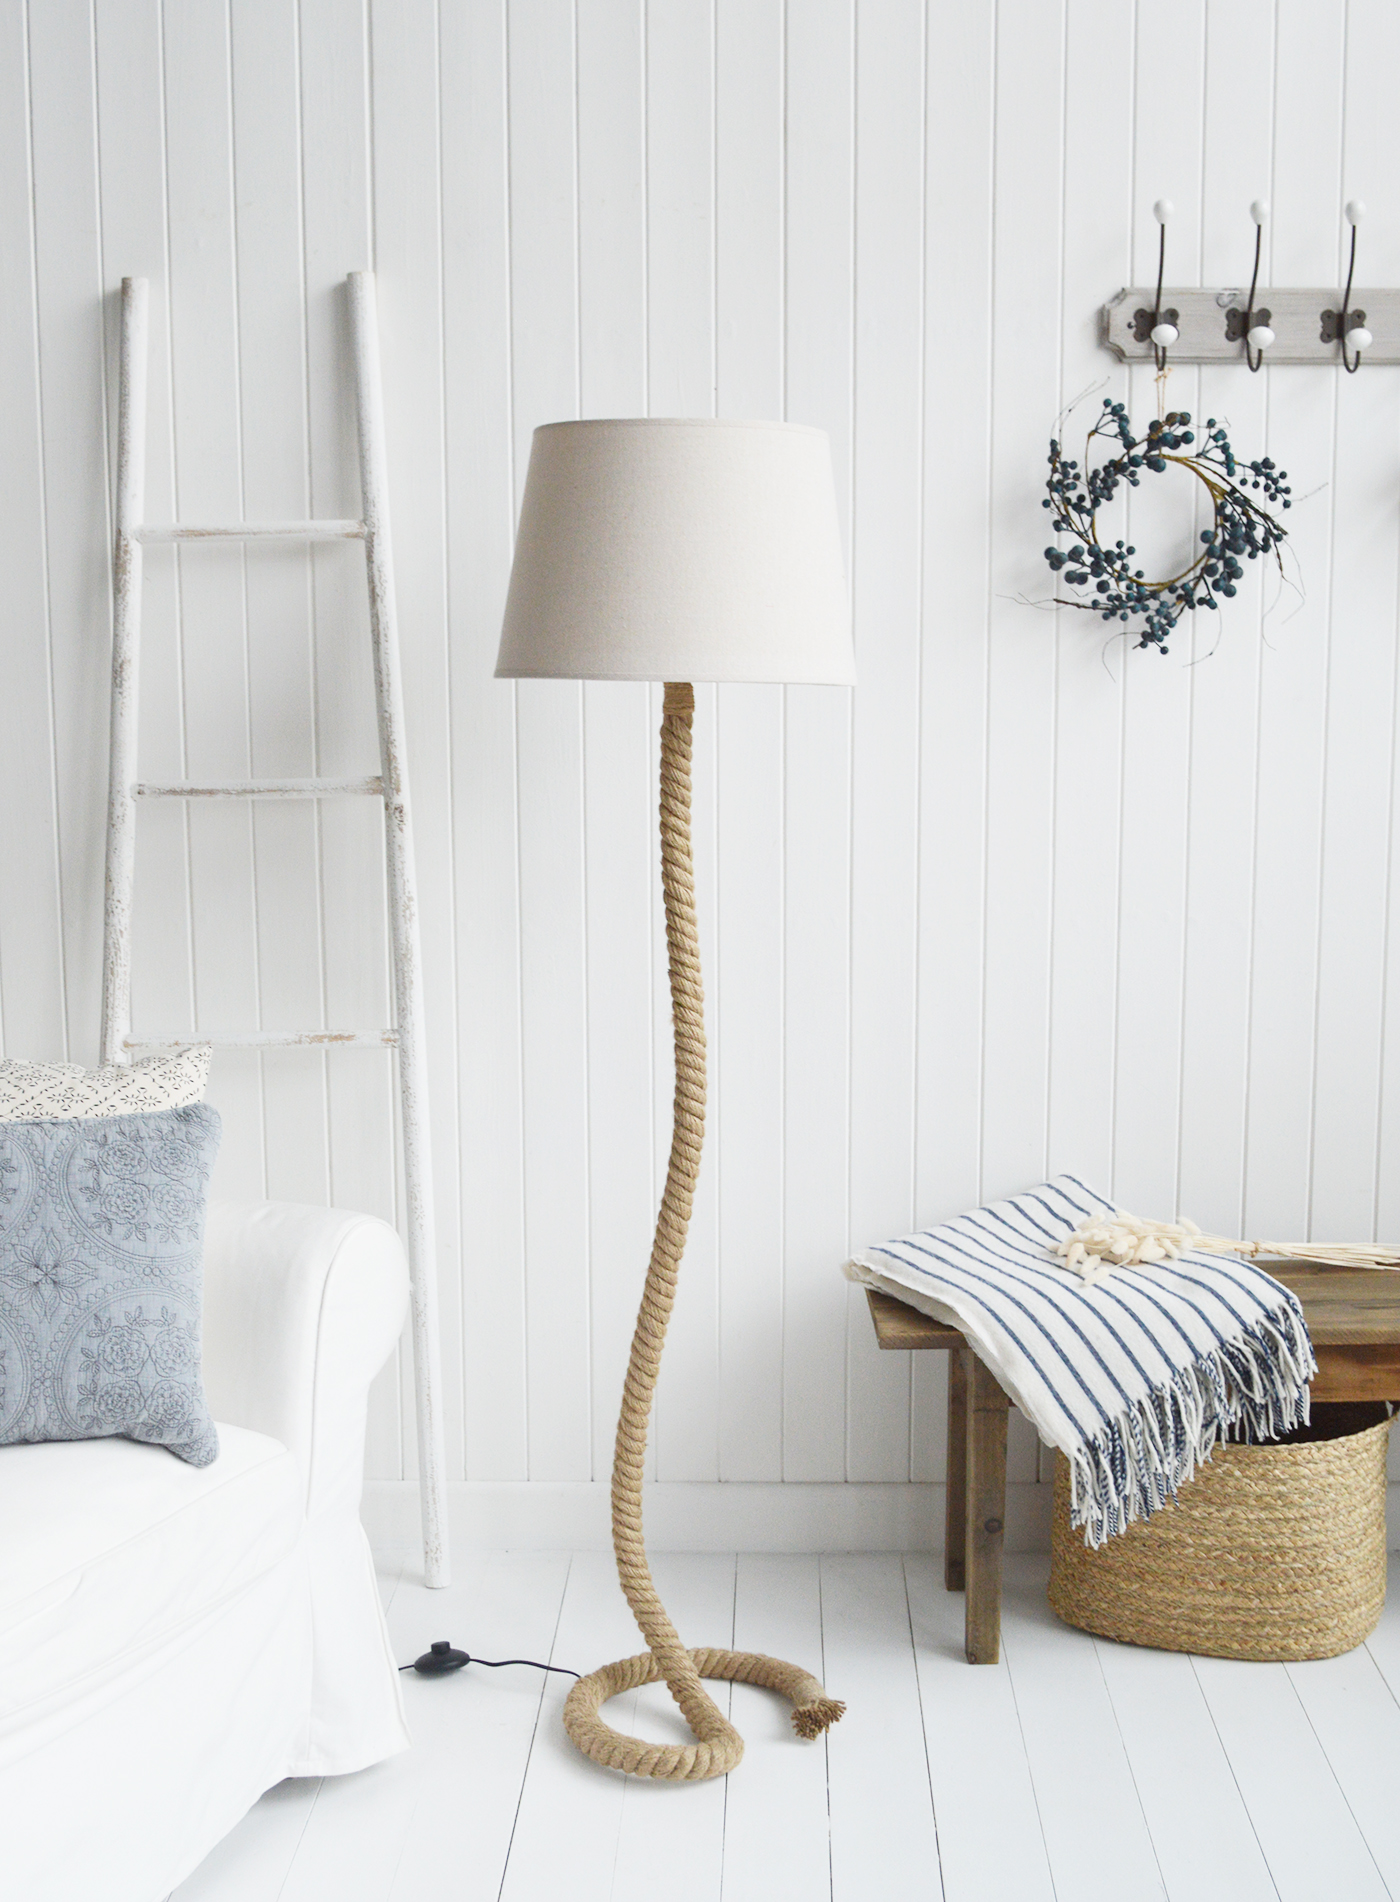 Rope Coastal Floor lamp  from The White Lighthouse Furniture. A lovely floor lamp the bedroom or living room. New England furniture and interiors for coastal, country and city homes